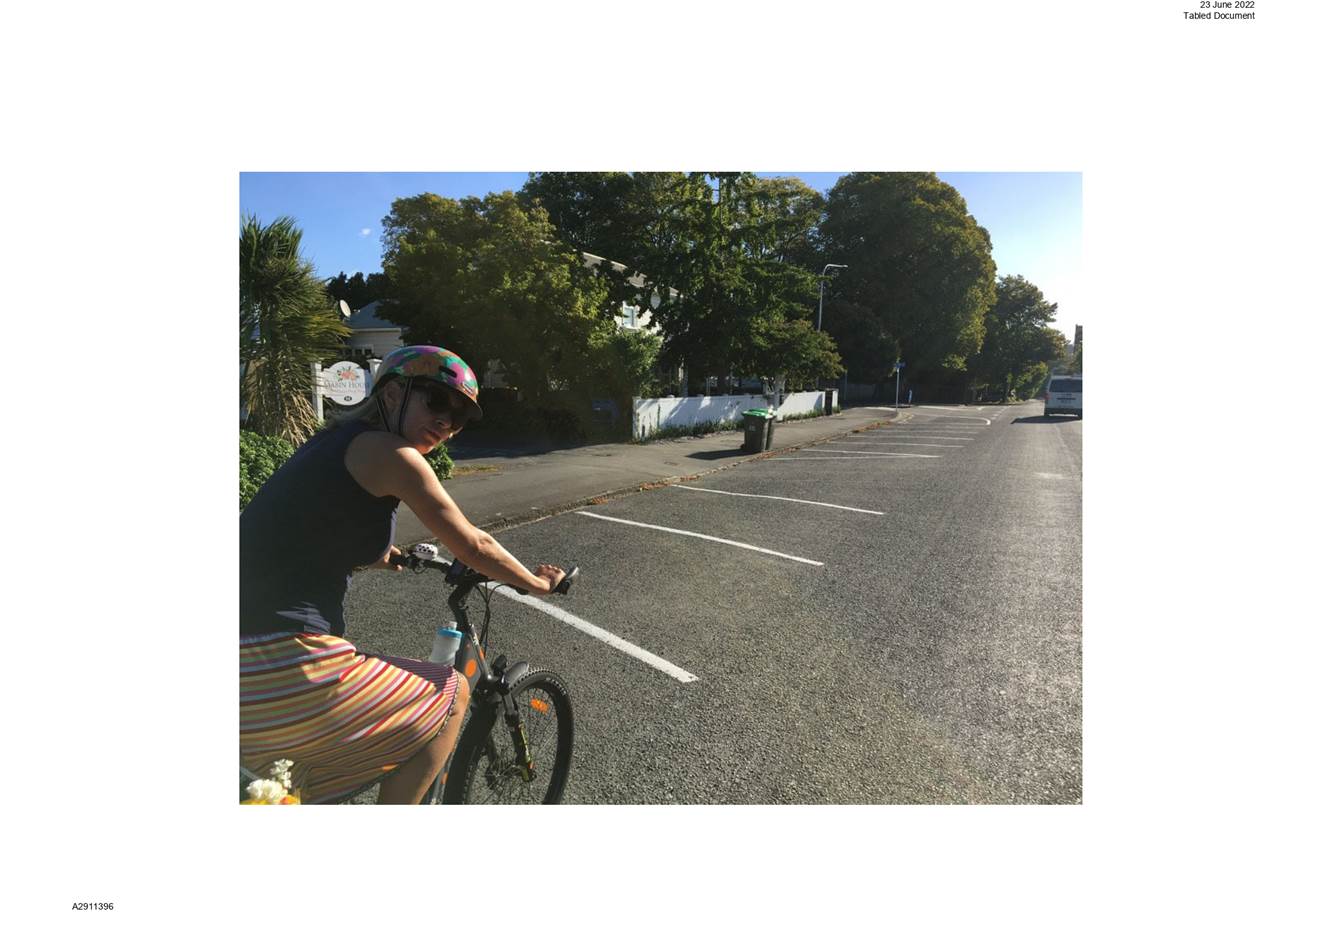 A person riding a bicycle

Description automatically generated with low confidence